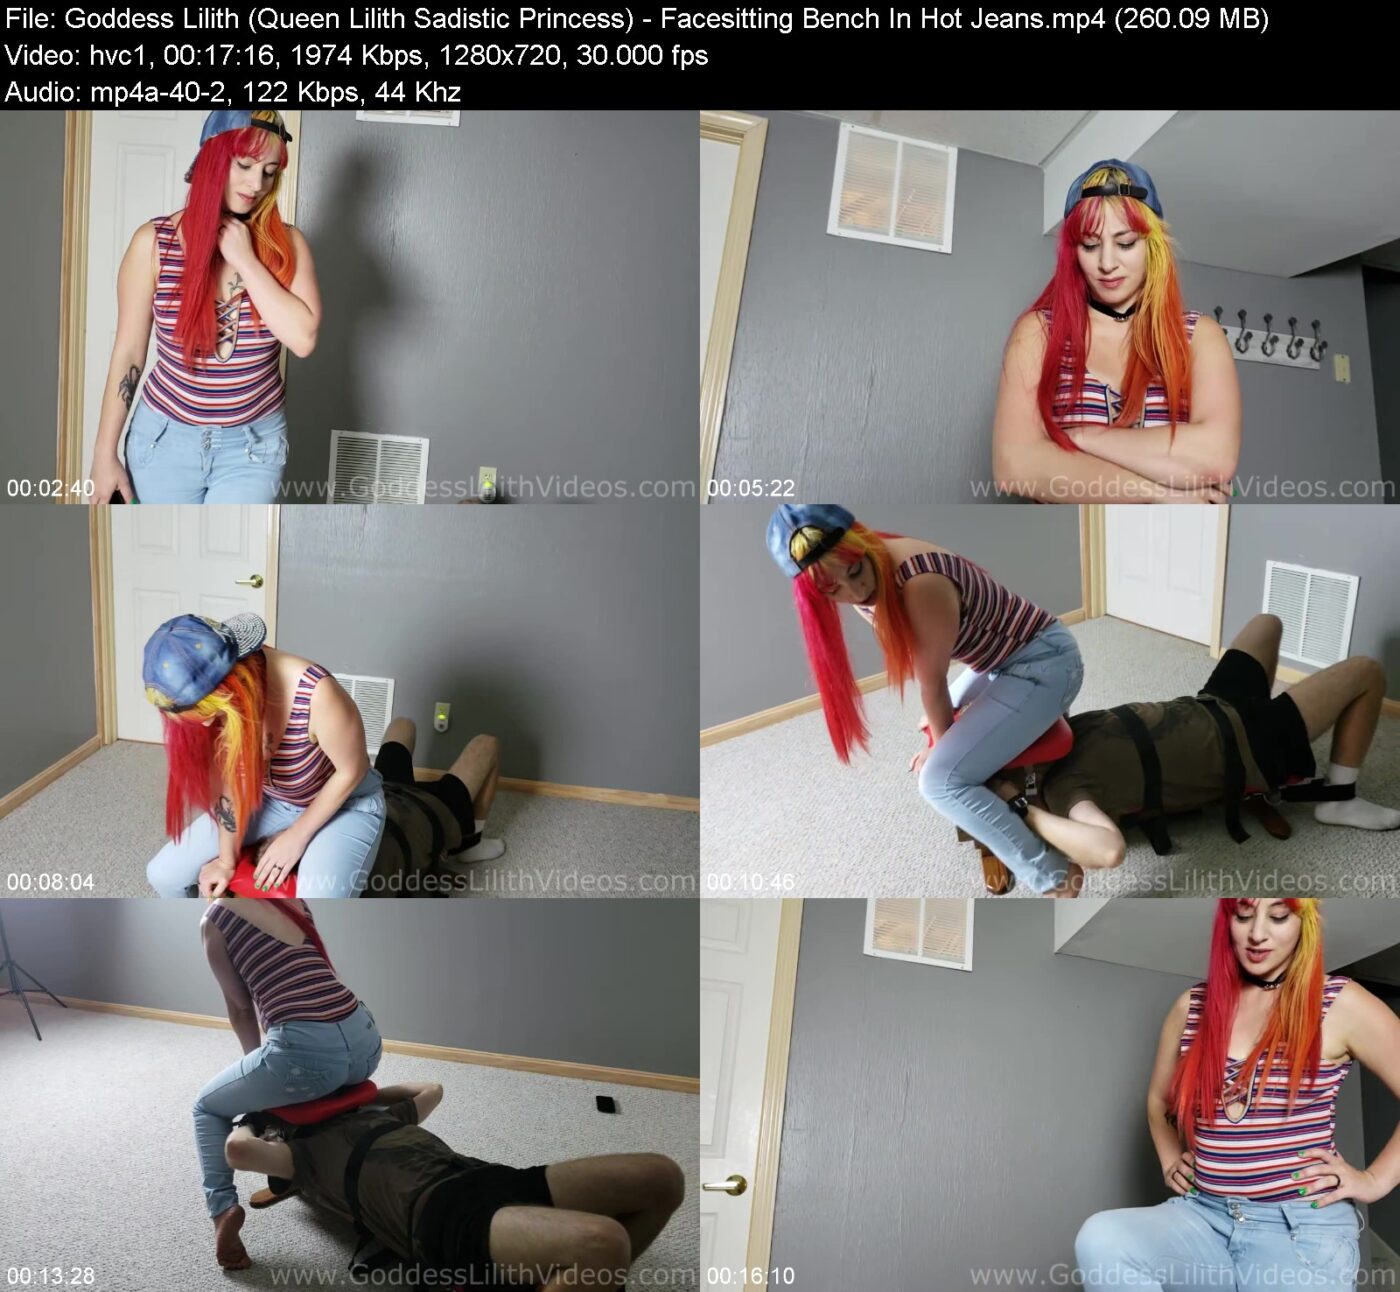 Goddess Lilith (Queen Lilith Sadistic Princess) in Facesitting Bench In Hot Jeans